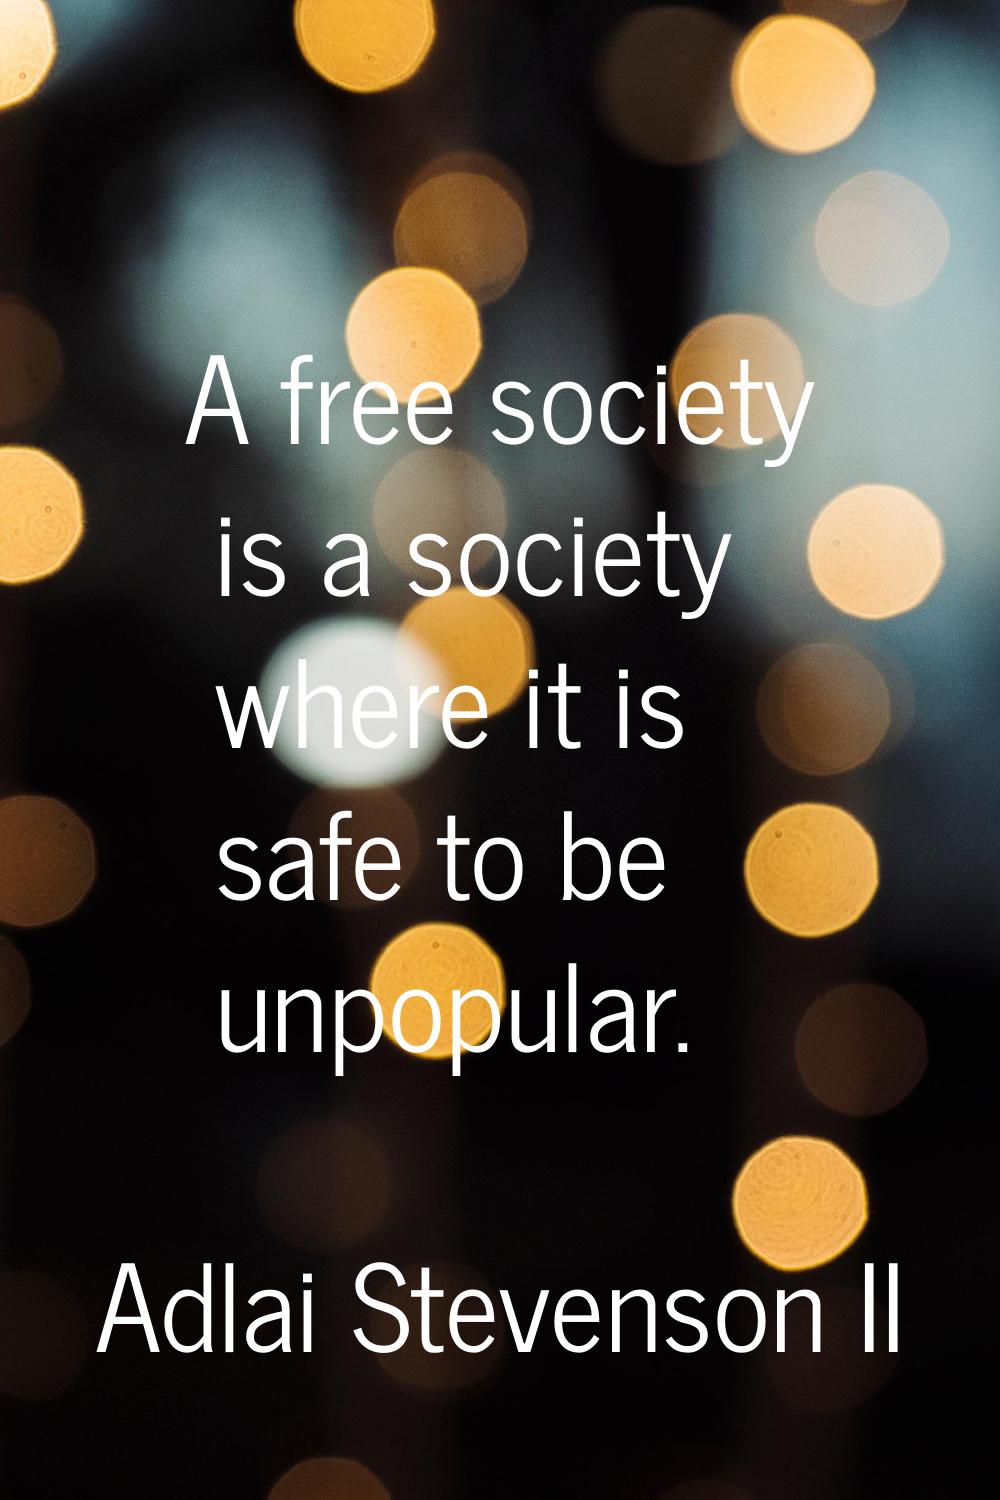 A free society is a society where it is safe to be unpopular.